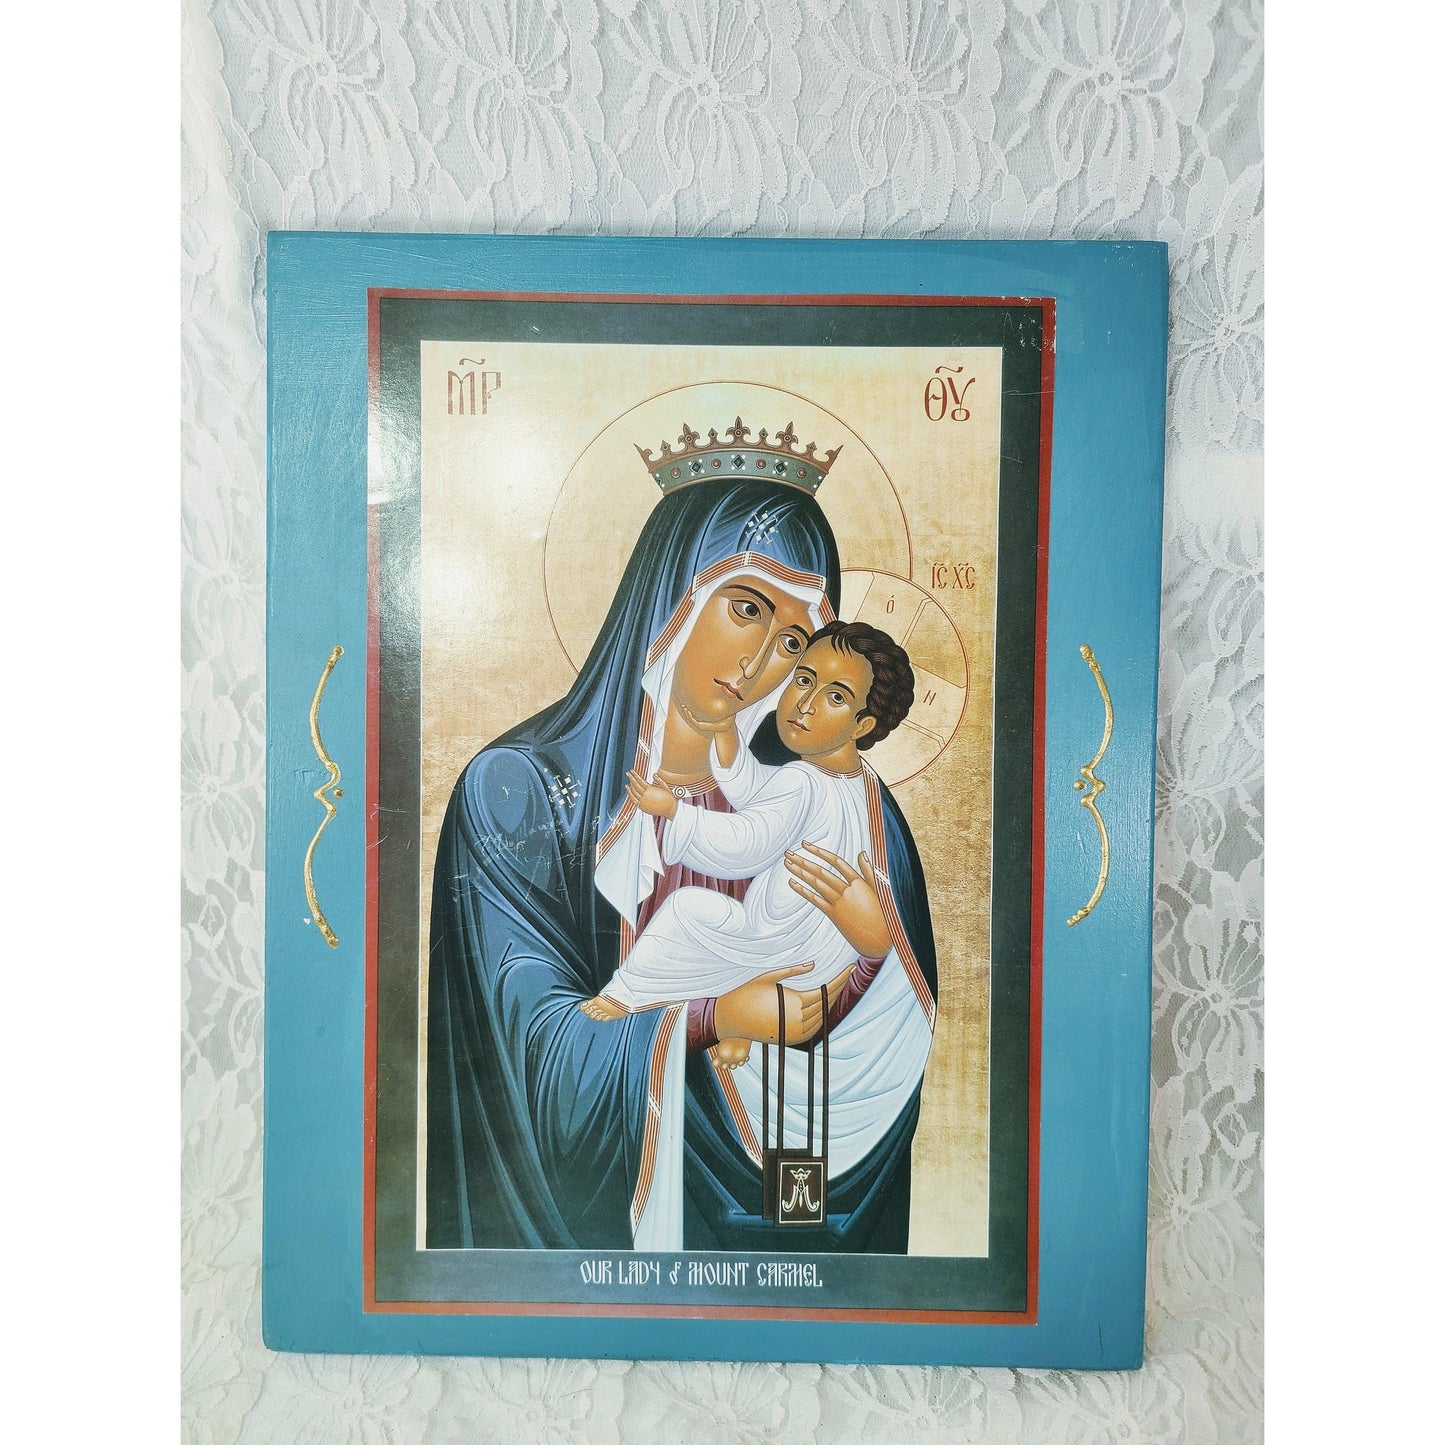 Vintage Russian Greek Orthodox Icon Wood Icon ~ Wall Hanging ~ Our Lady of Mount Carmel ~ Large 10 by 13"